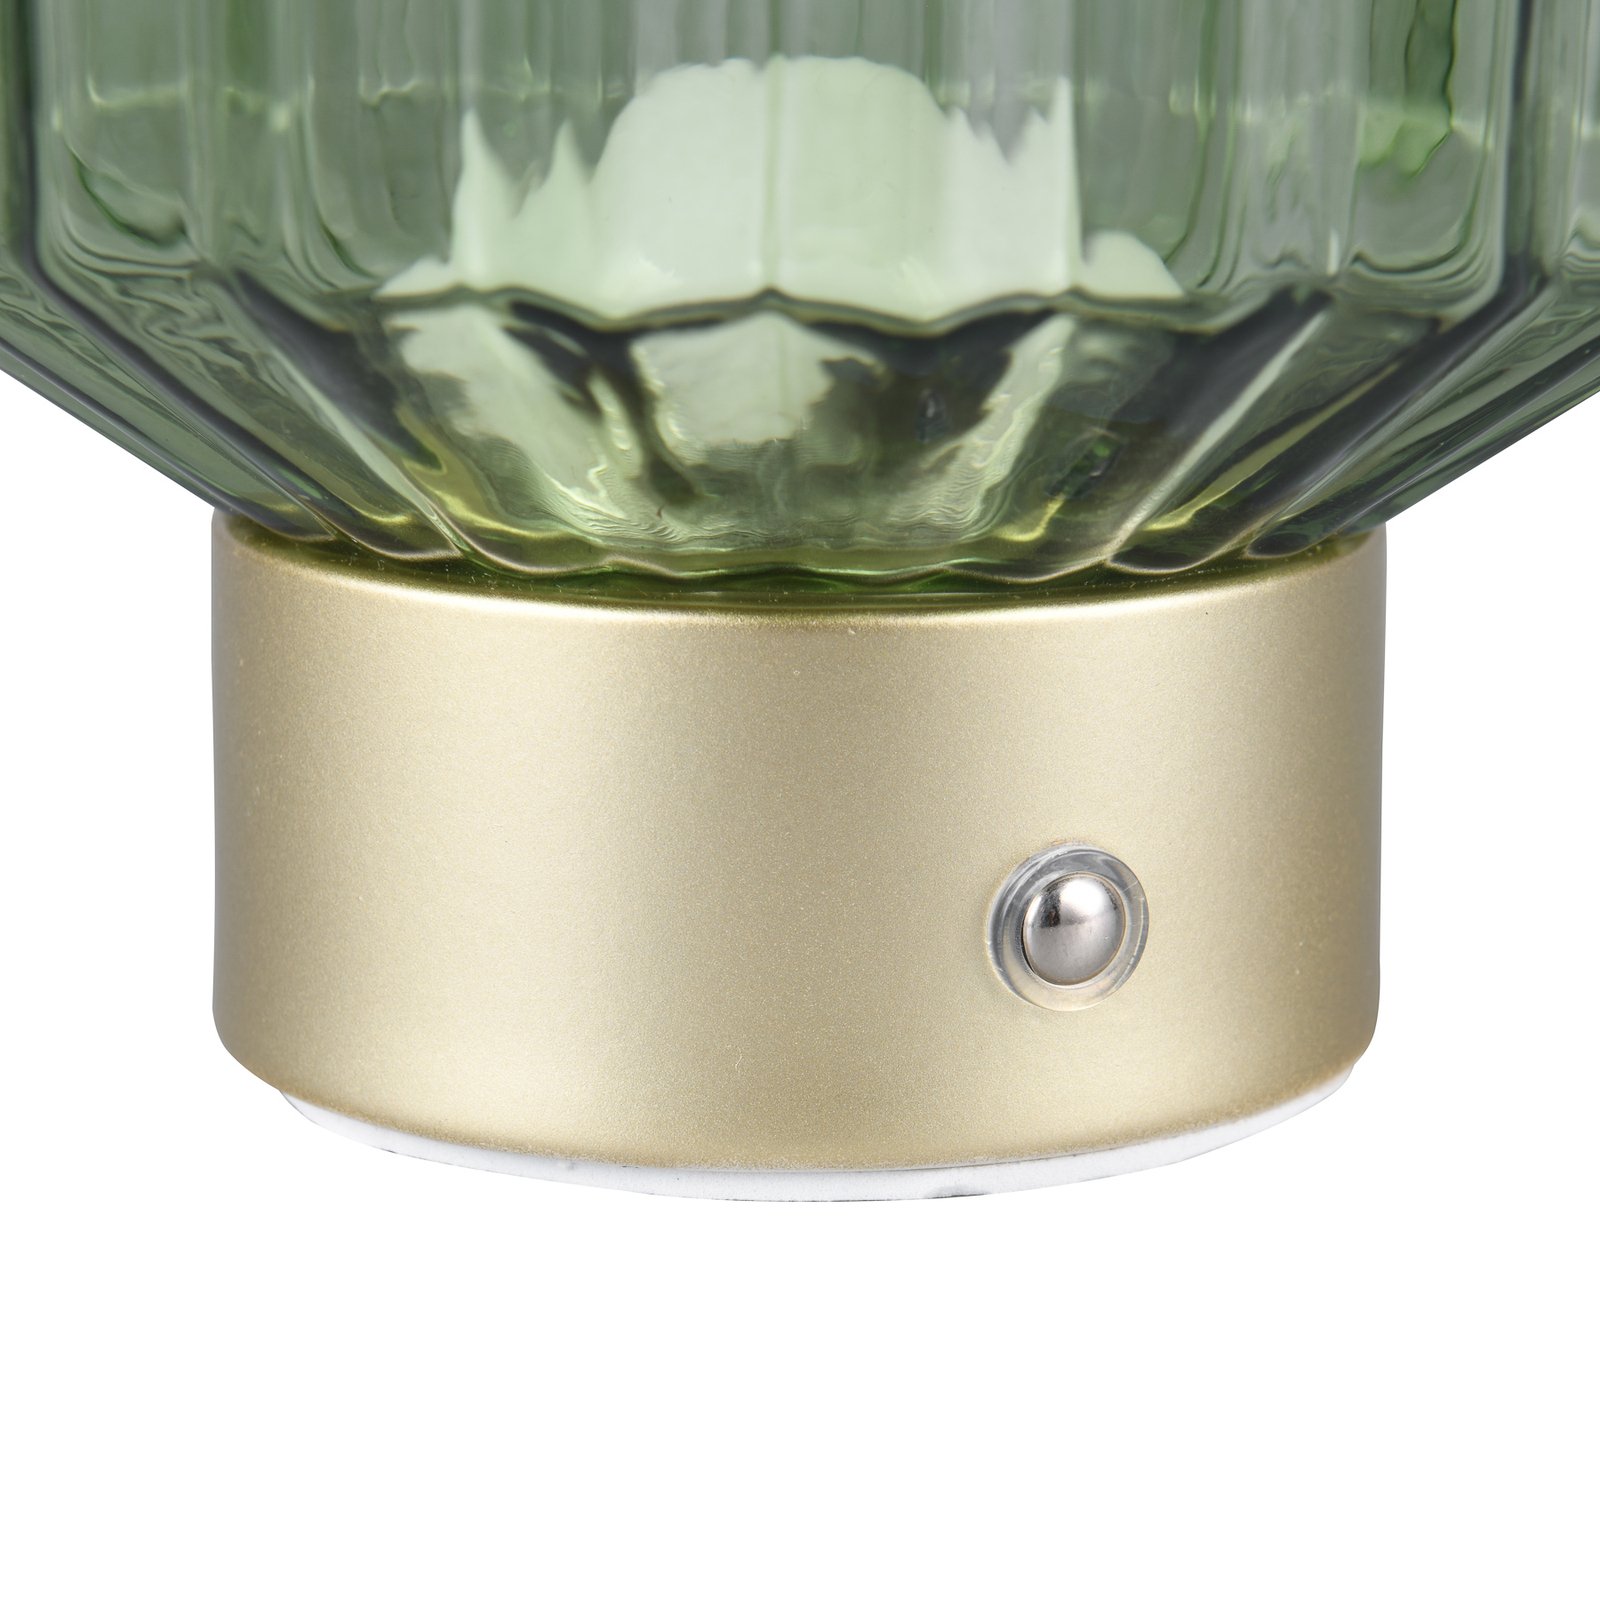 LED table lamp Lord, brass/green, height 19.5 cm, glass